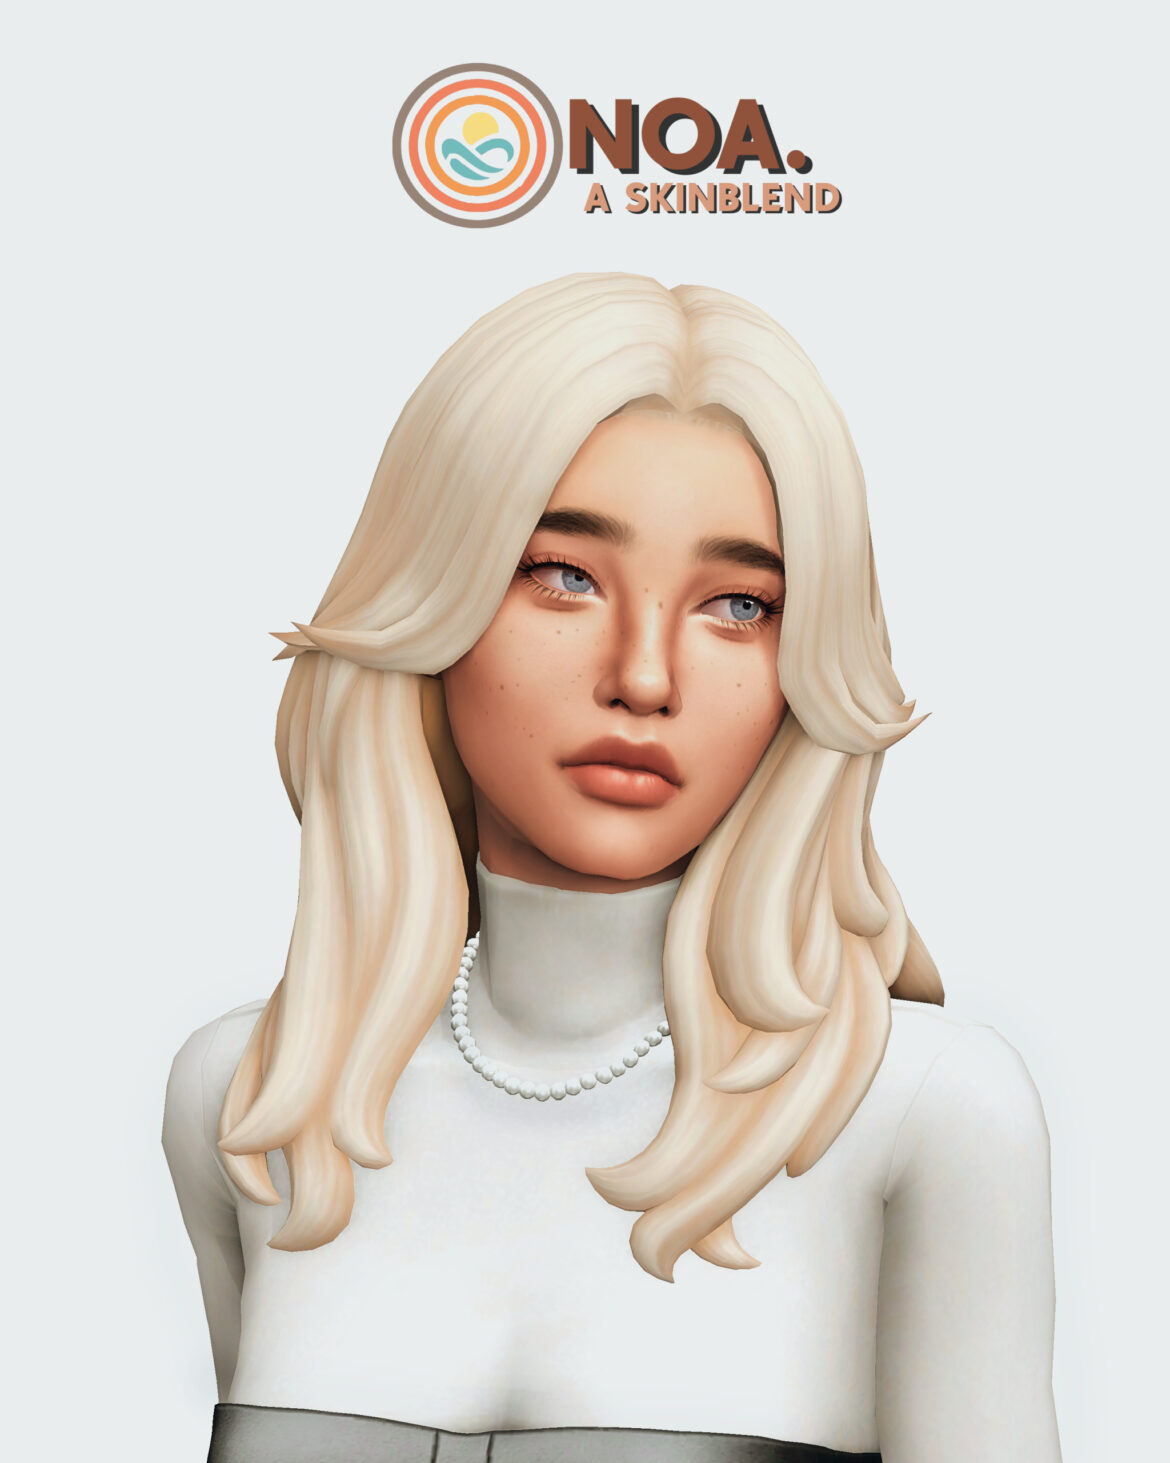 Noa a skinblend default and non default - The Sims Guide